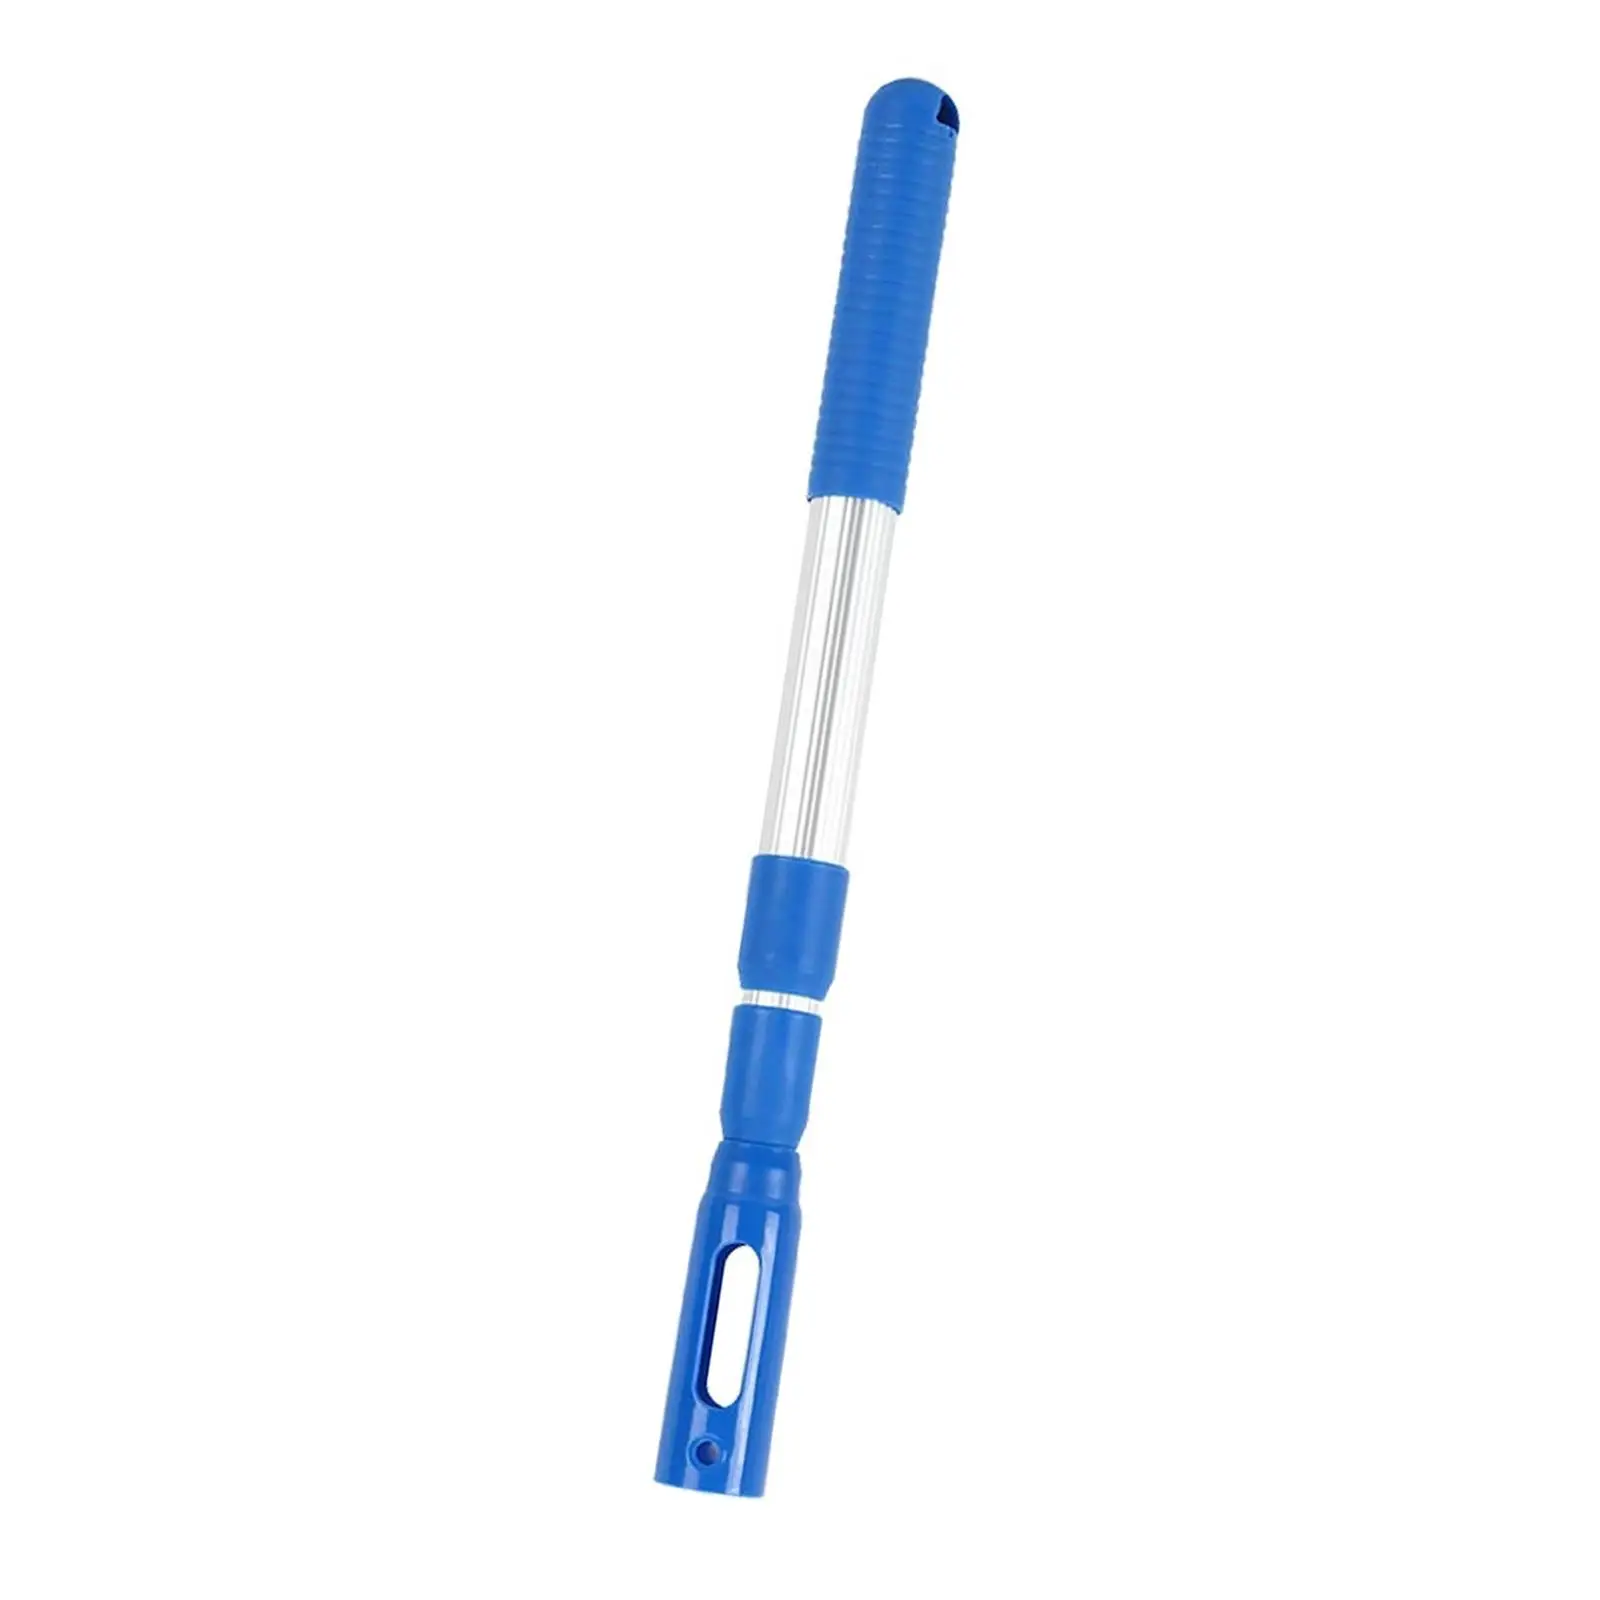 Extendable Pool Handle with Cut Resistant Pullover 3 Section Aluminum Alloy Portable Pool Rod for Nets Pool Cleaner Supplies